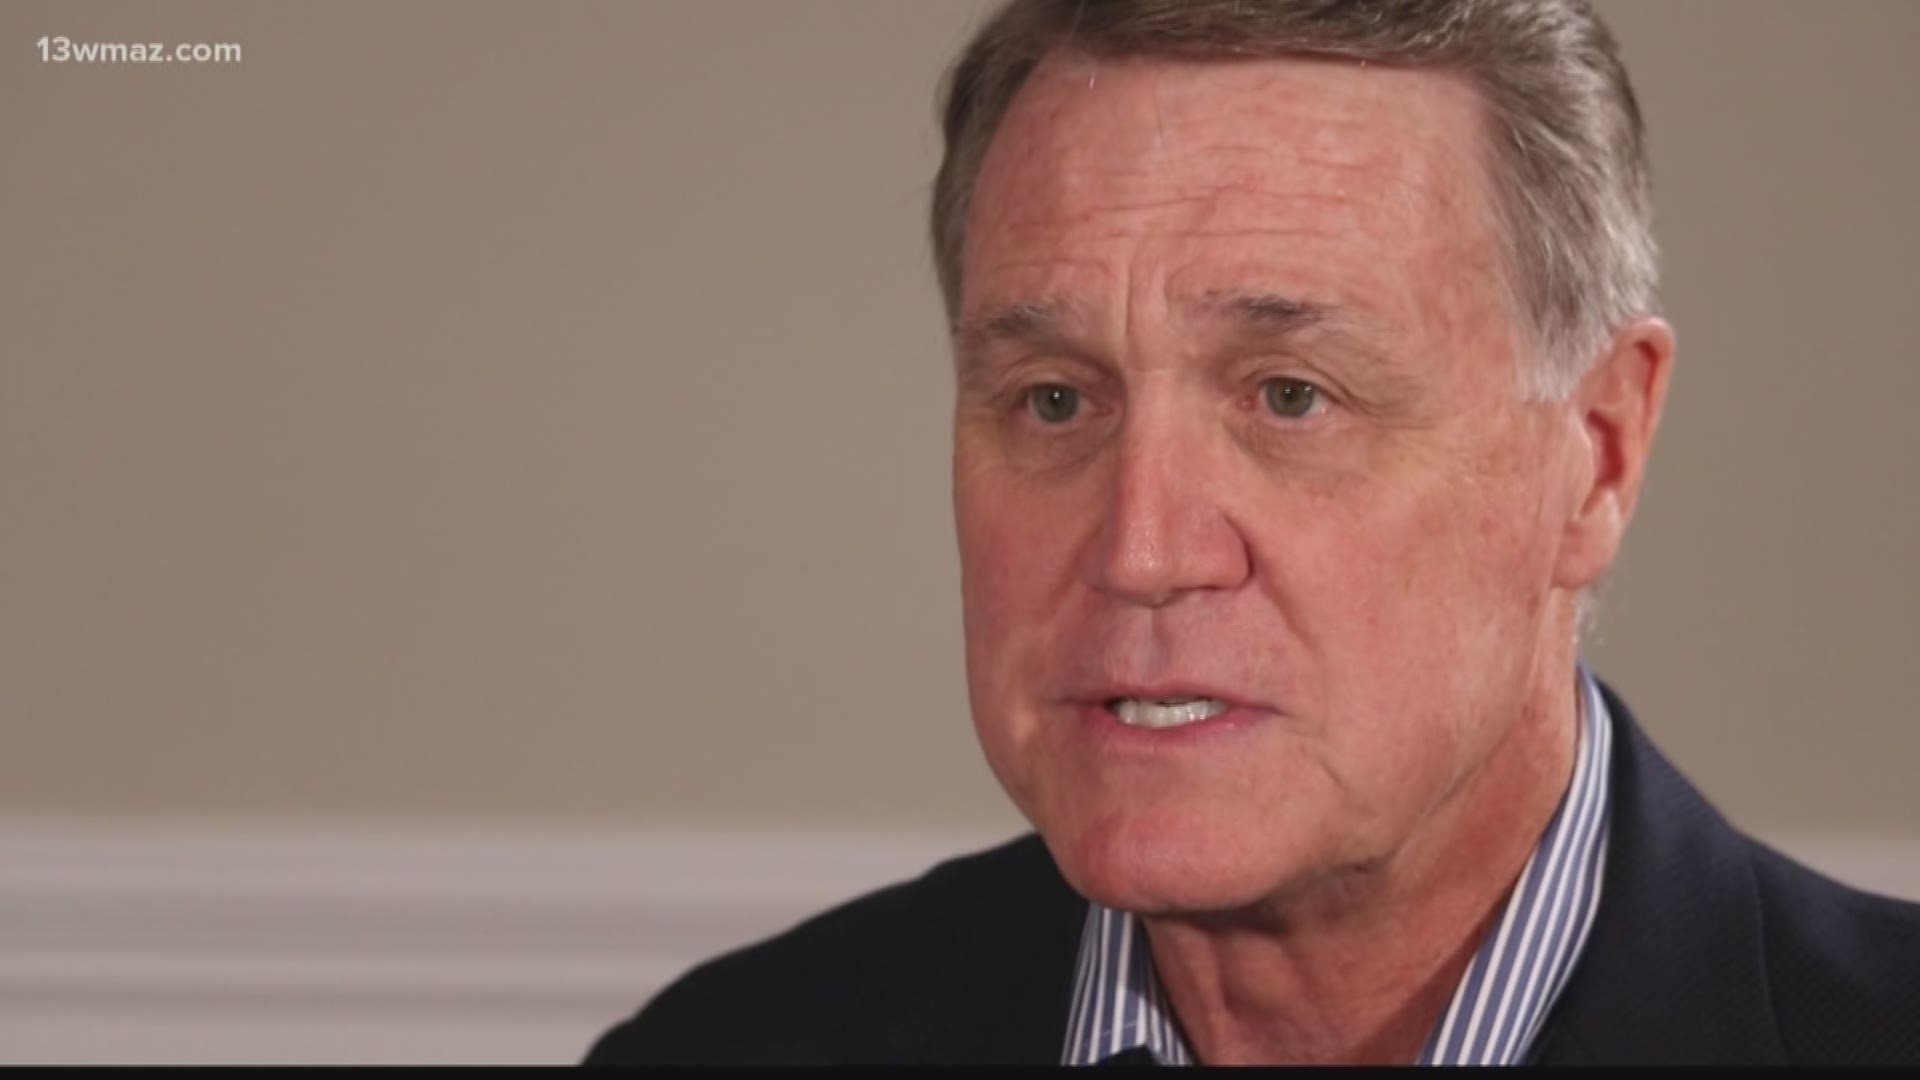 Senator David Perdue sits down with 13WMAZ for an interview on several topics.